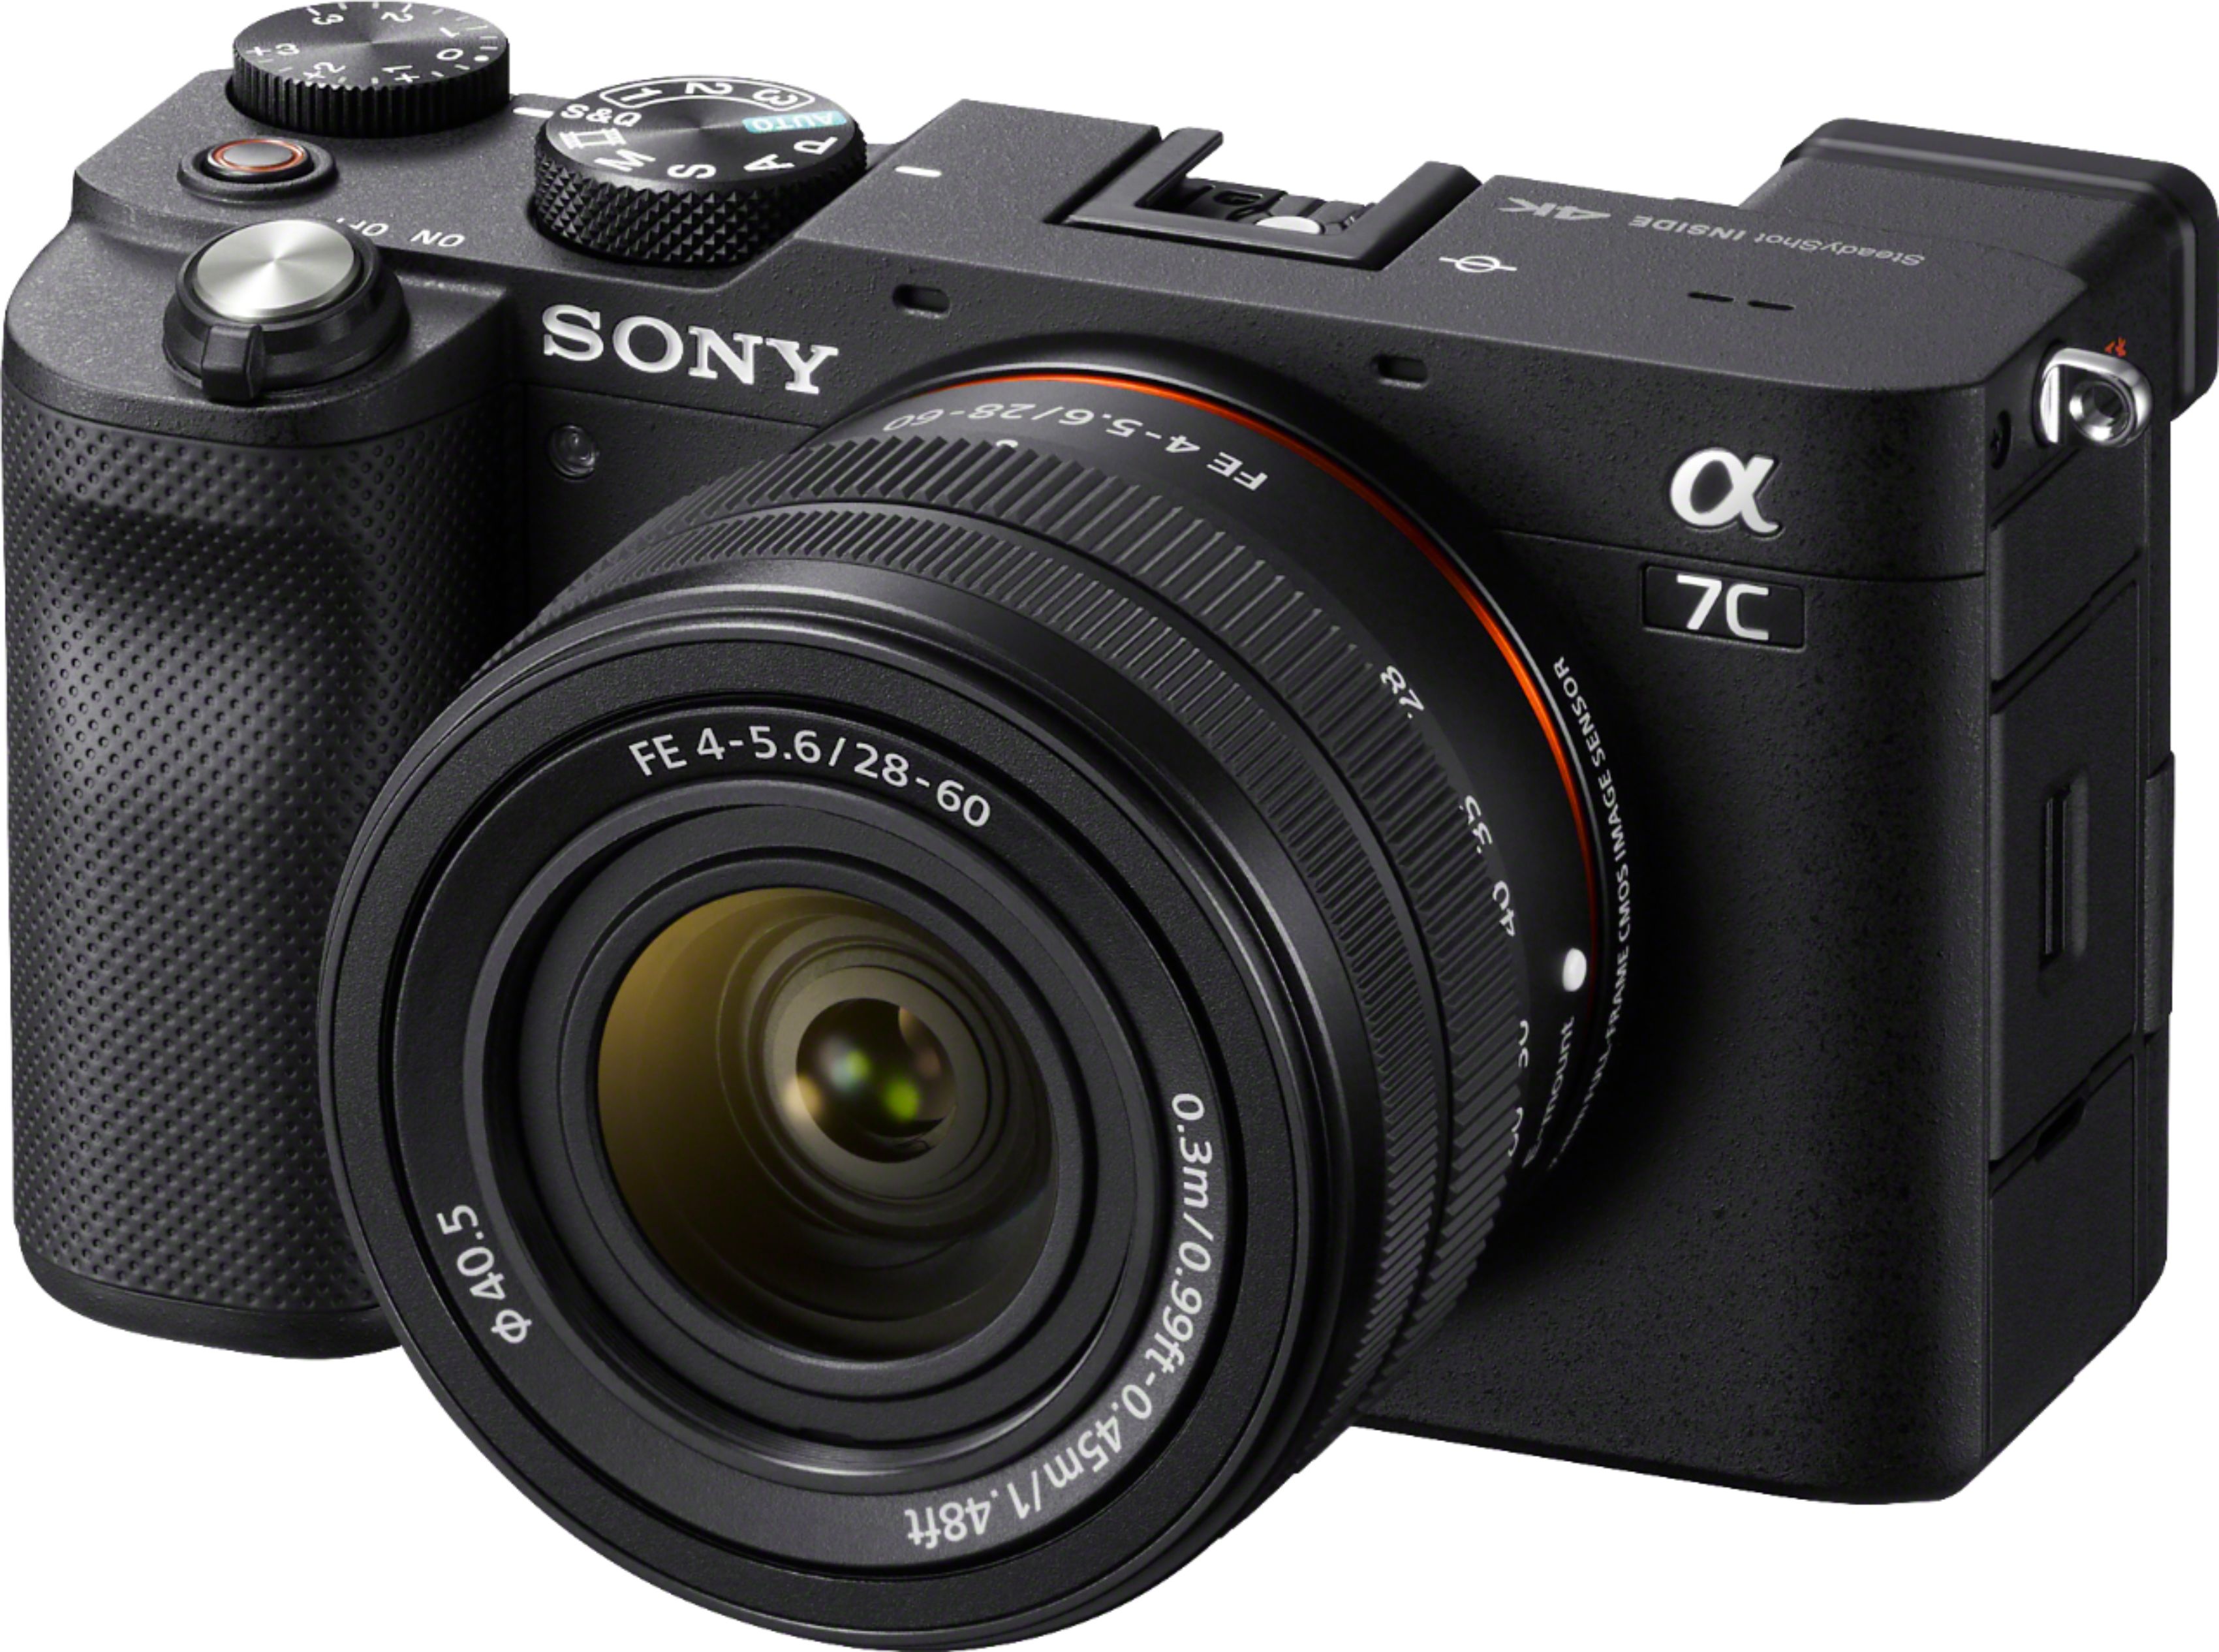 Sony Alpha Professional Photography Cameras, Sony Alpha CommunitySony  Alpha Camera, Professional Cameras